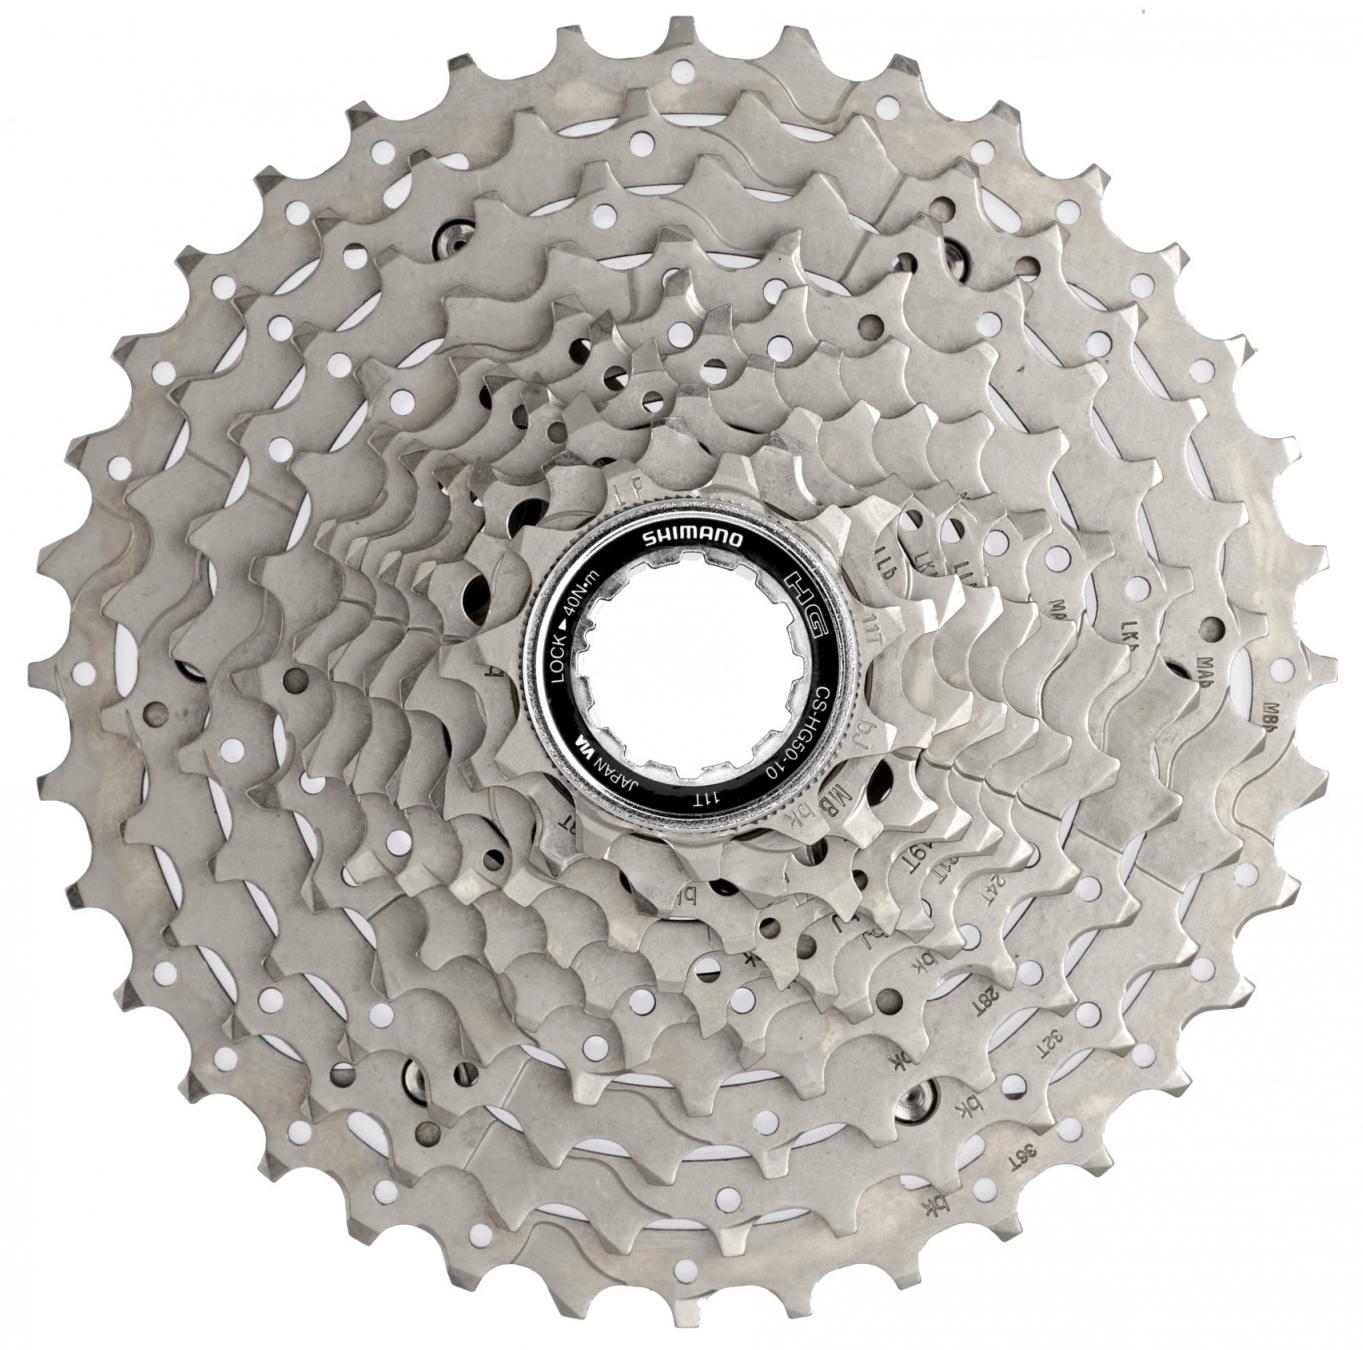 Shimano Deore Hg50 10 Speed Cassette - Silver